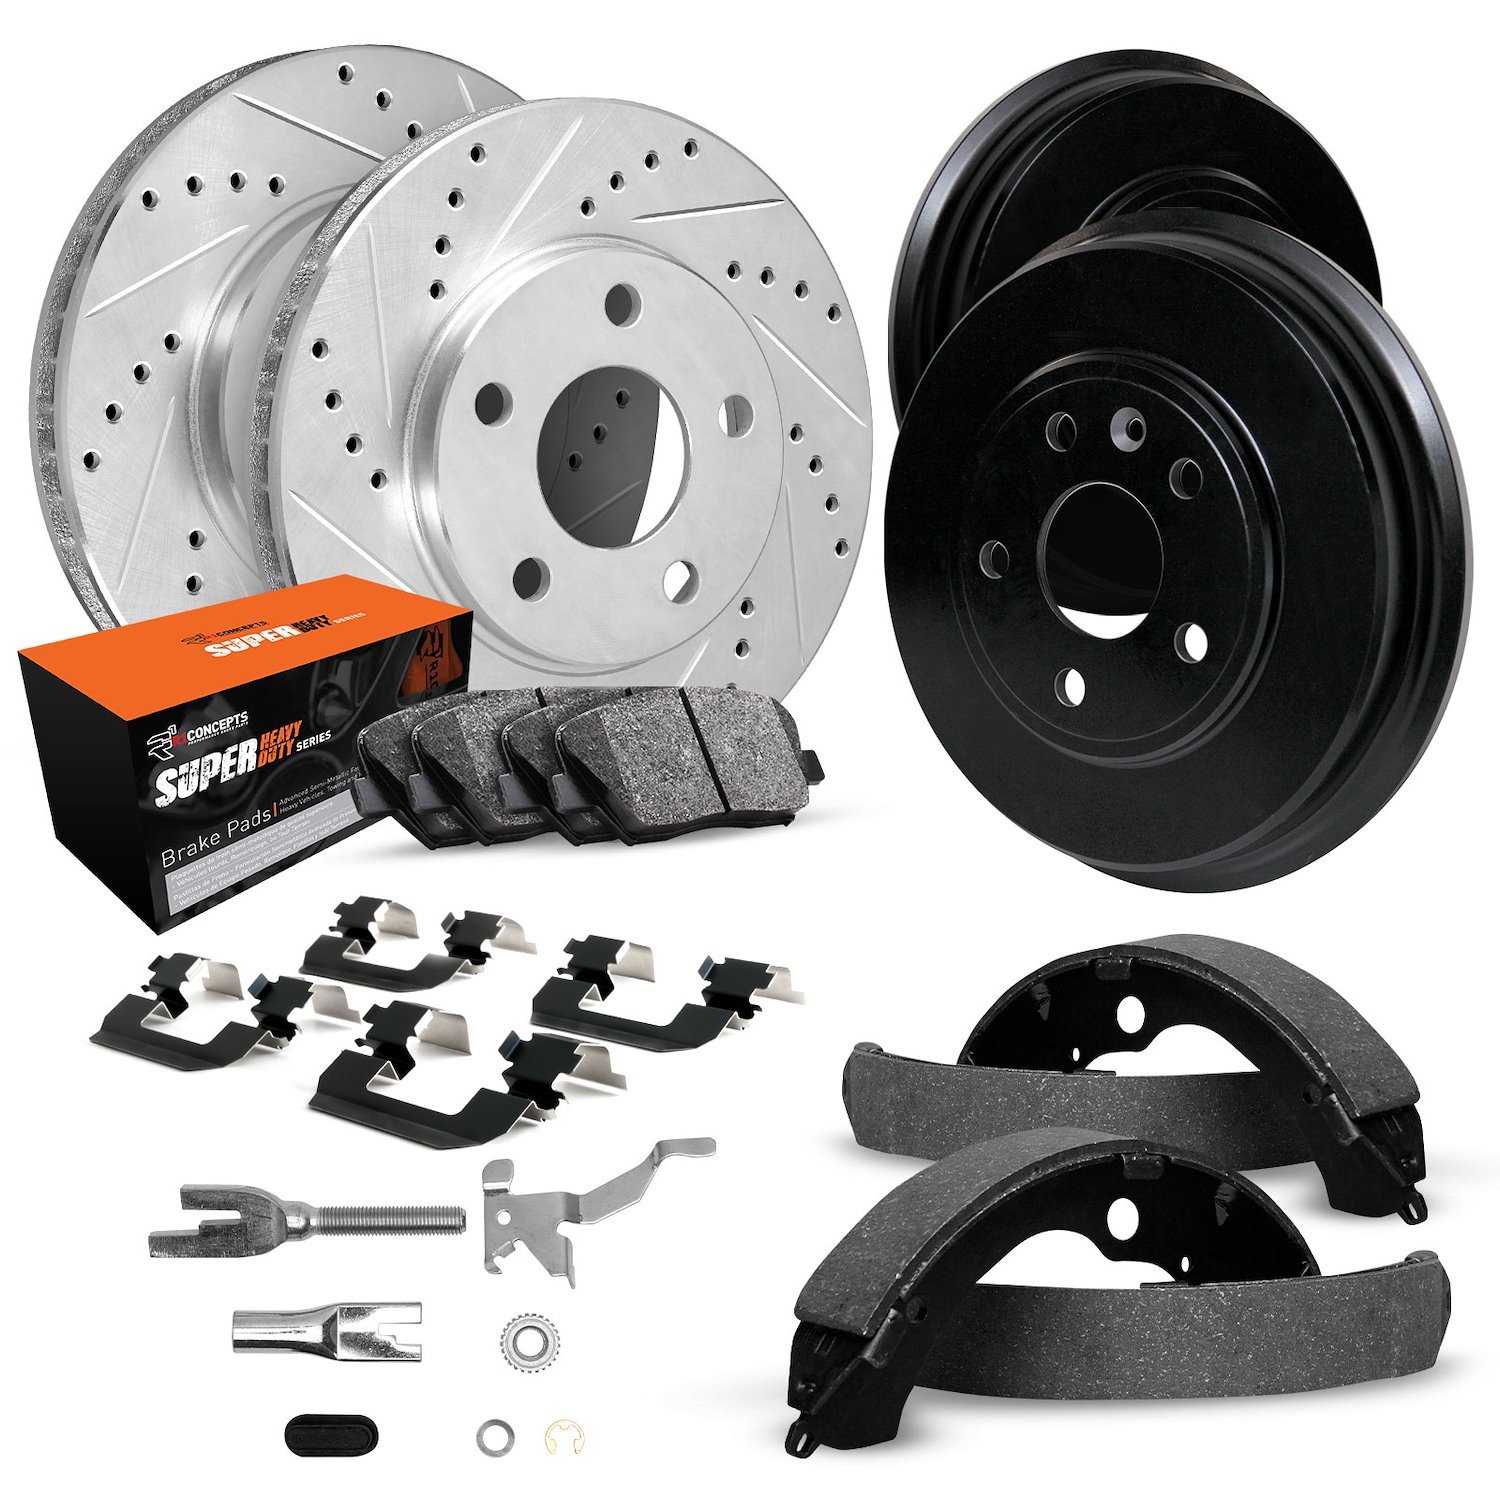 E-Line Drilled/Slotted Silver Rotor & Drum Set w/Super-Duty Pads, Shoes/Hardware/Adjusters, 1973-1997 Mopar